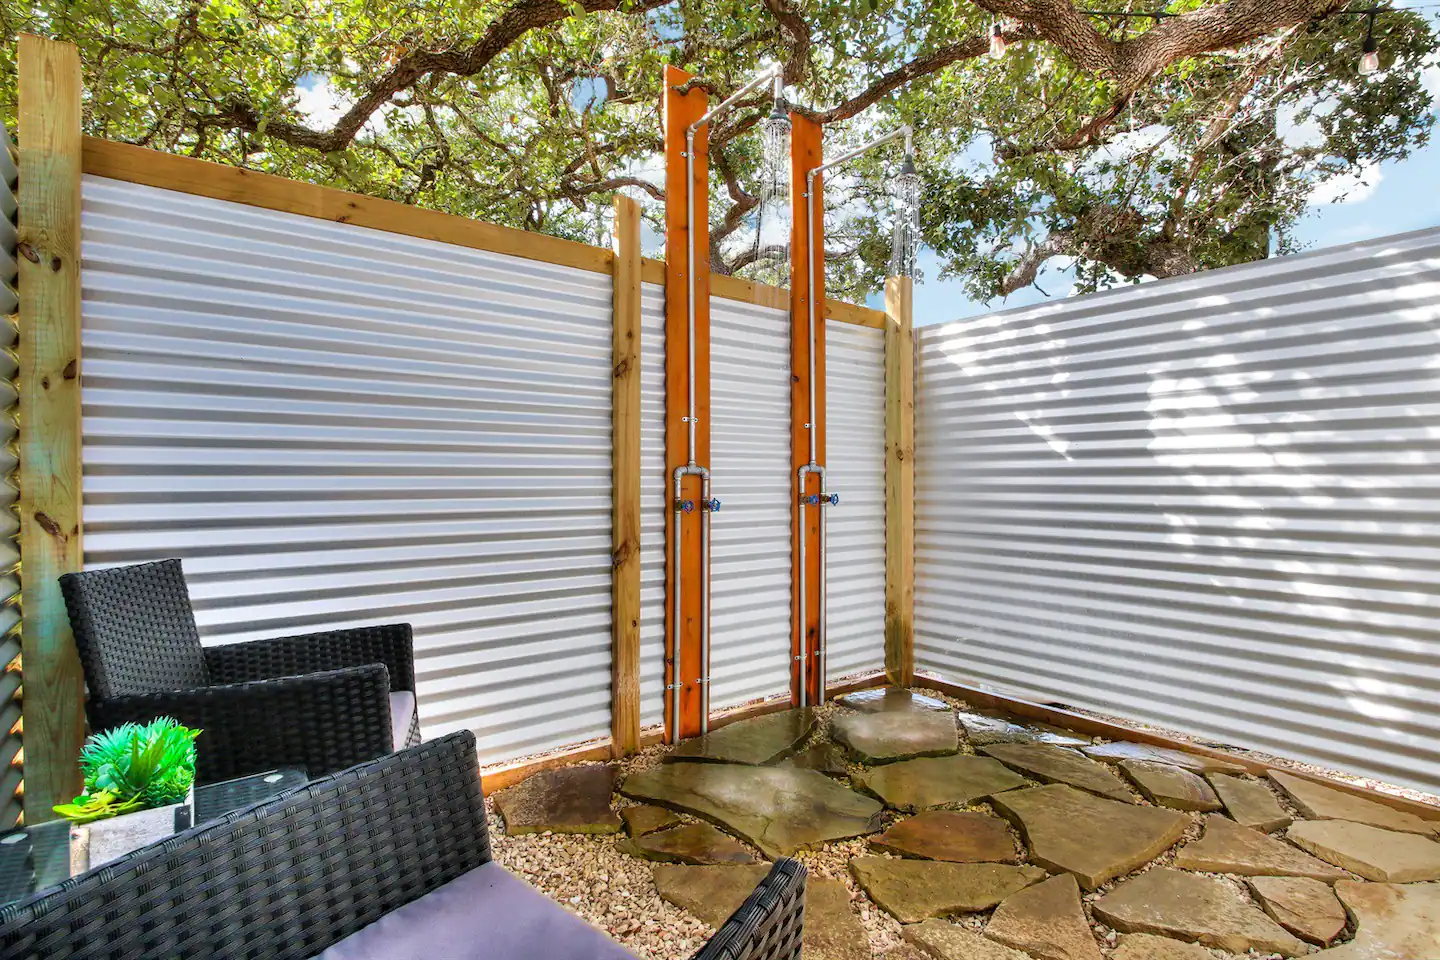 Cool off with your own outdoor shower.